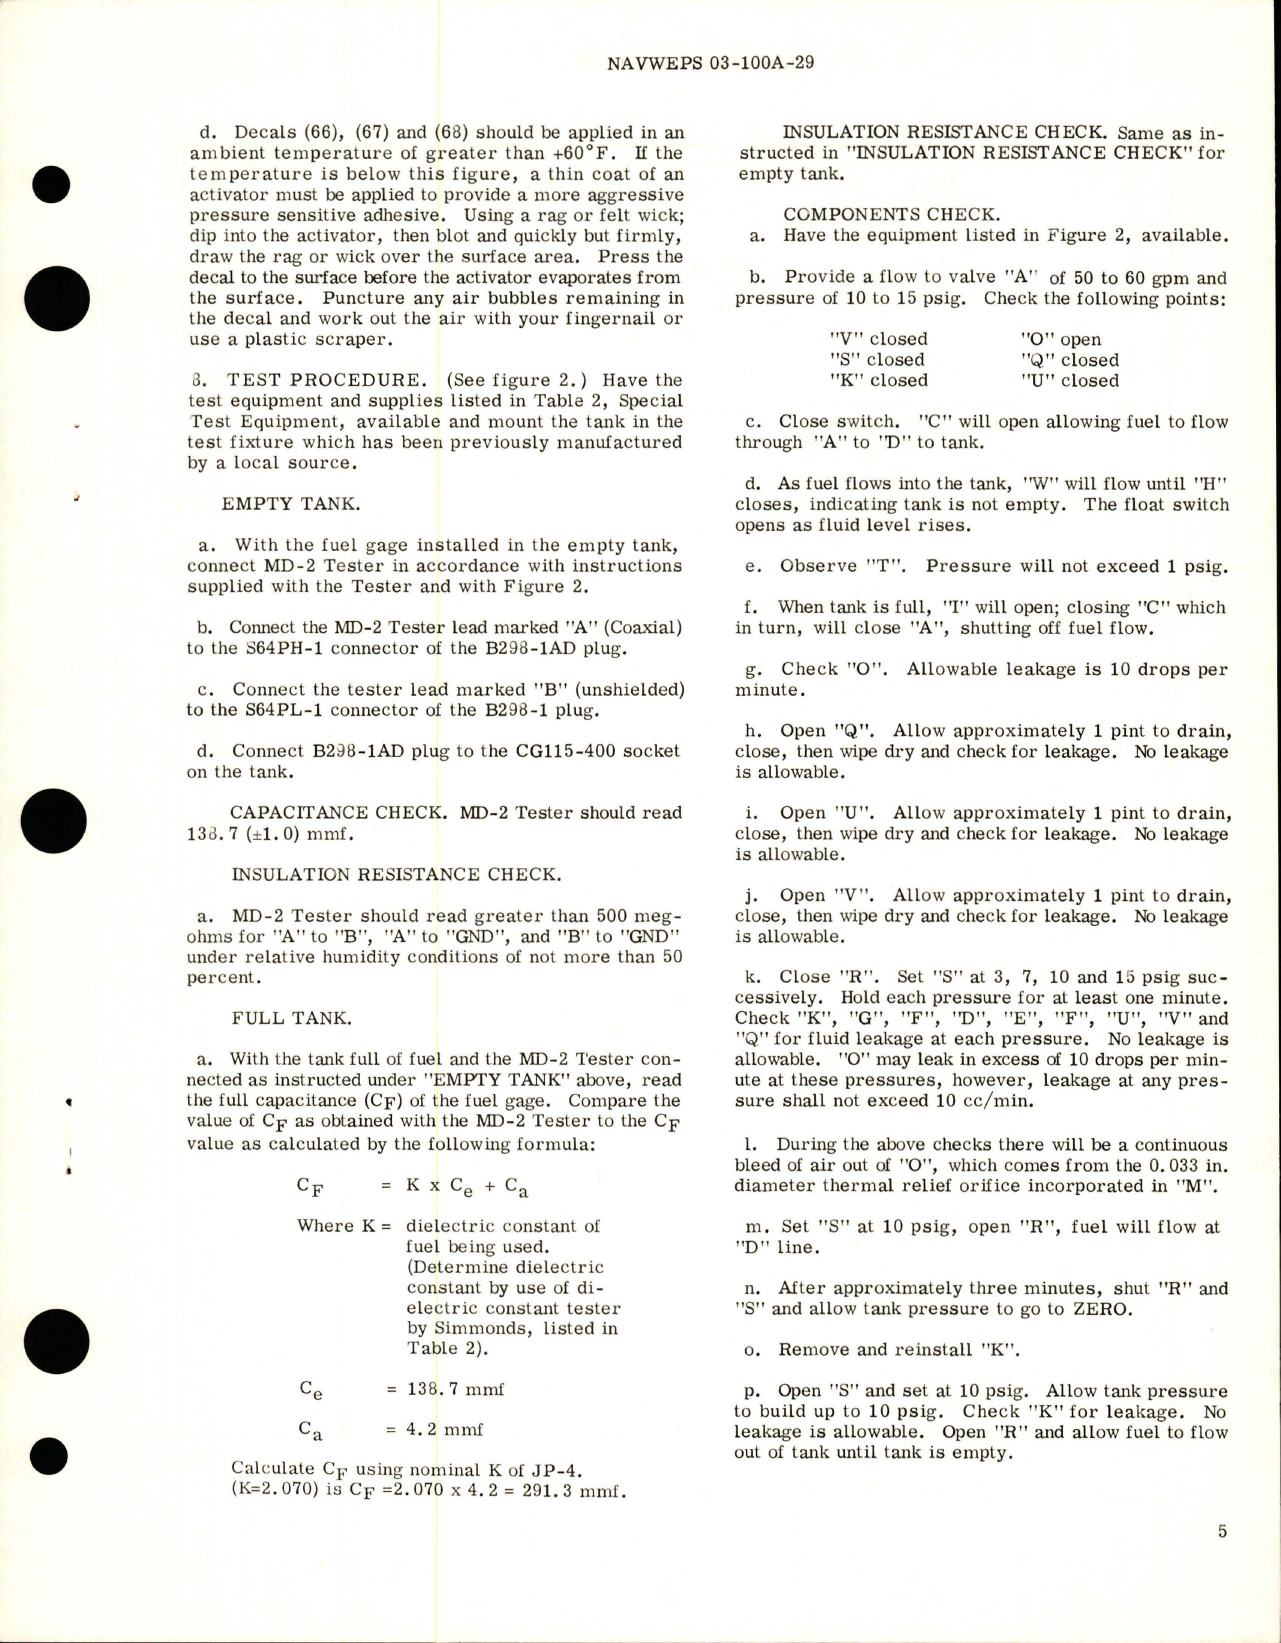 Sample page 5 from AirCorps Library document: Overhaul Instructions with Illustrated Parts Breakdown for Tank Assembly 400 gal - ATP-D1A - Part 2312718 